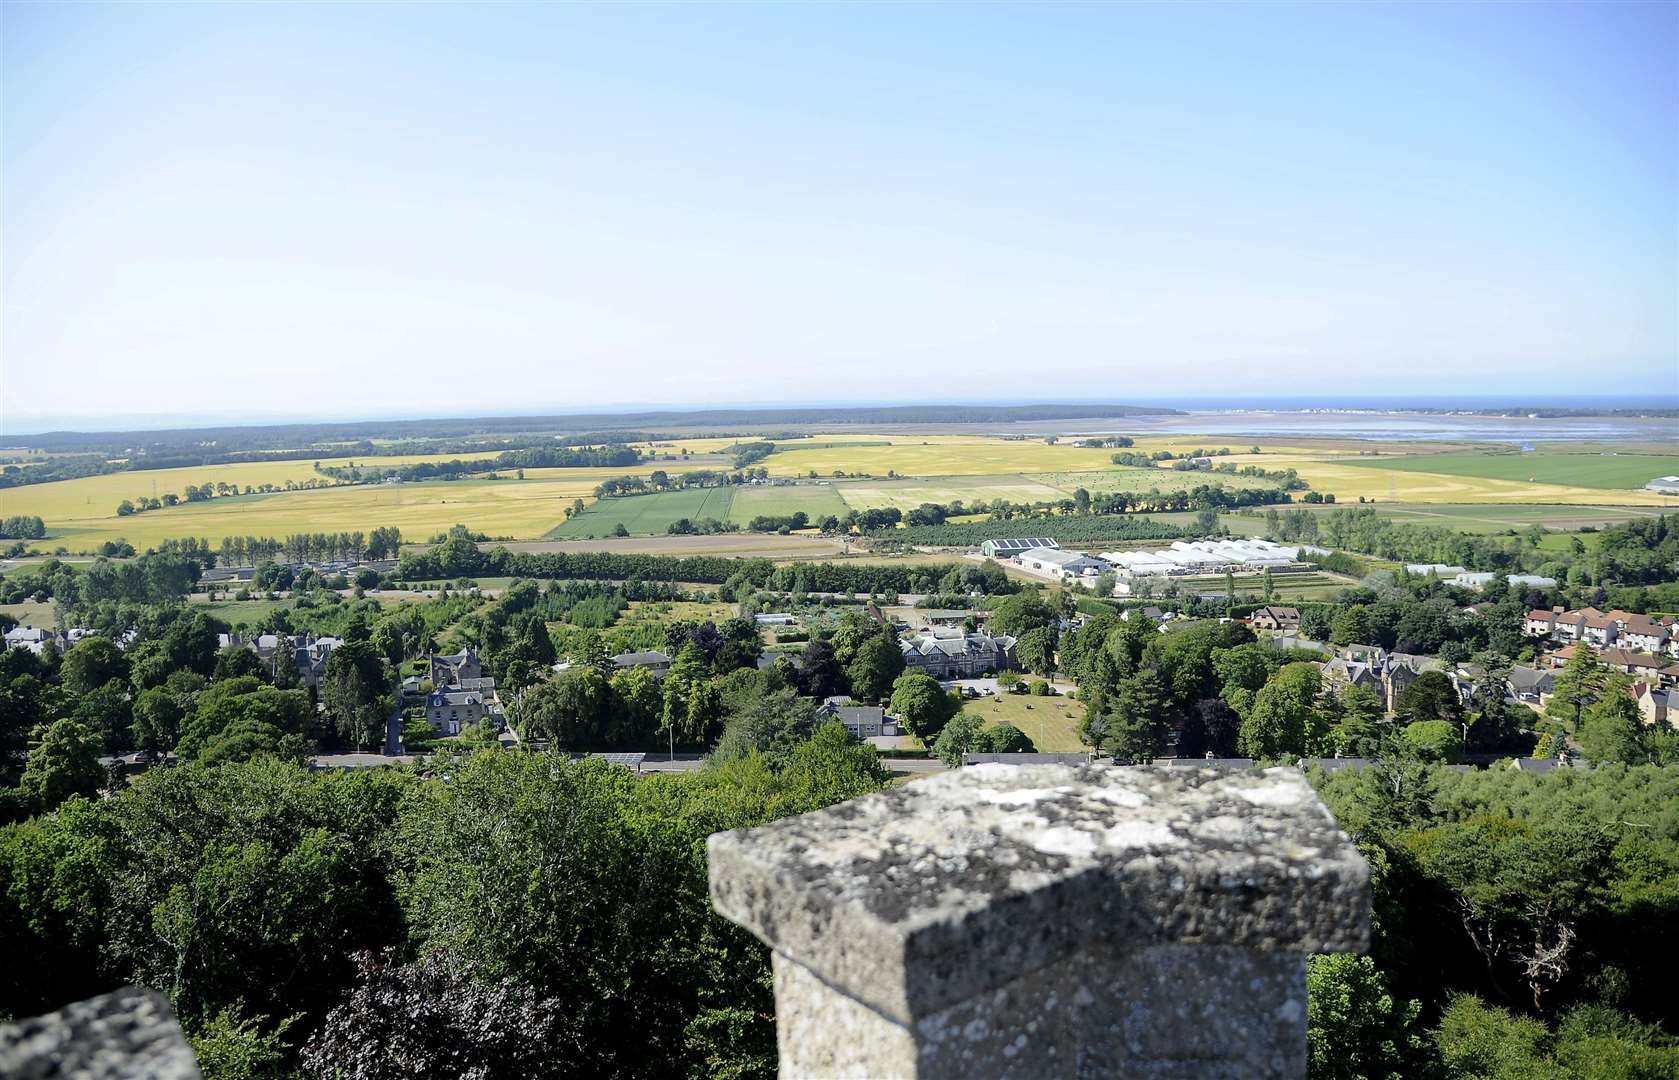 The view from the top of Nelson's Tower.